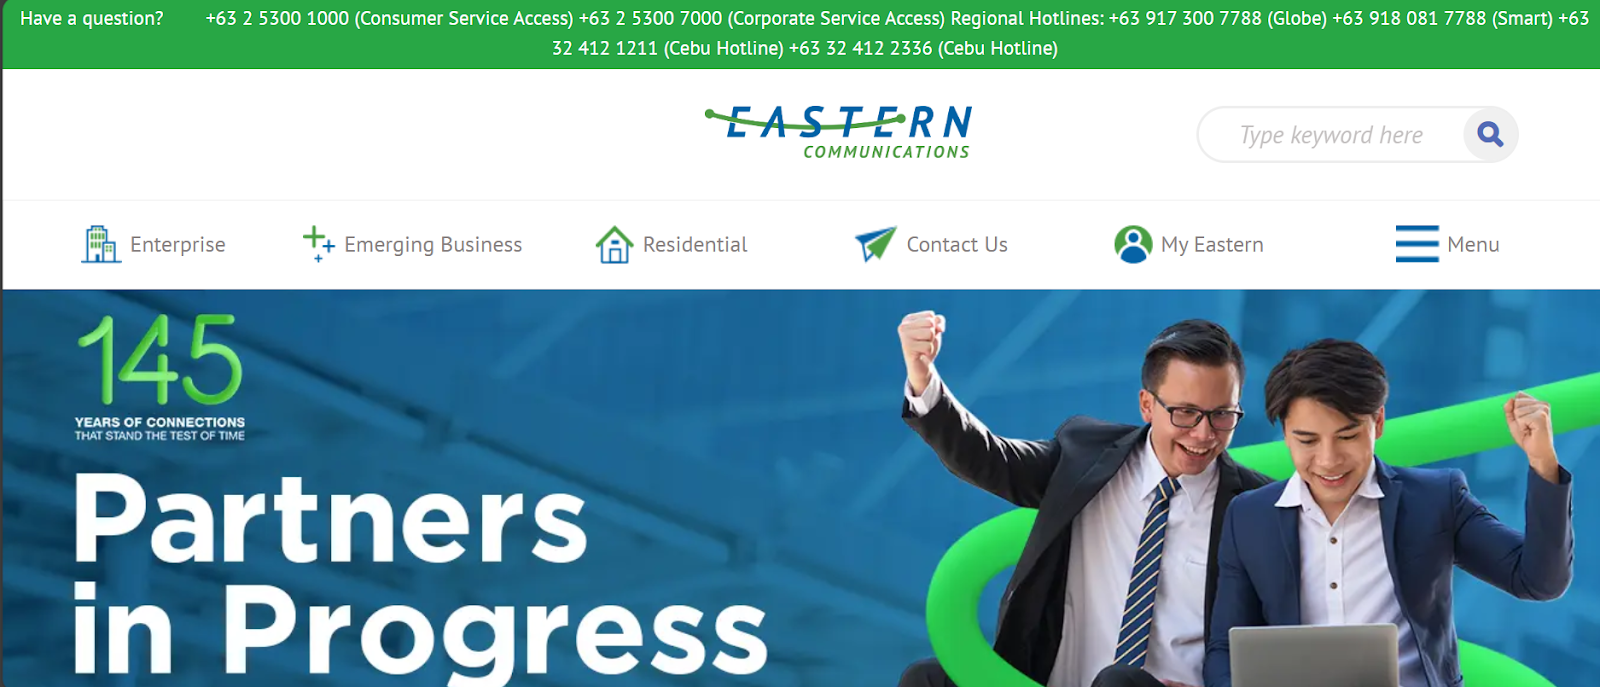 Eastern Communications website snapshot highlighting the services it offers.